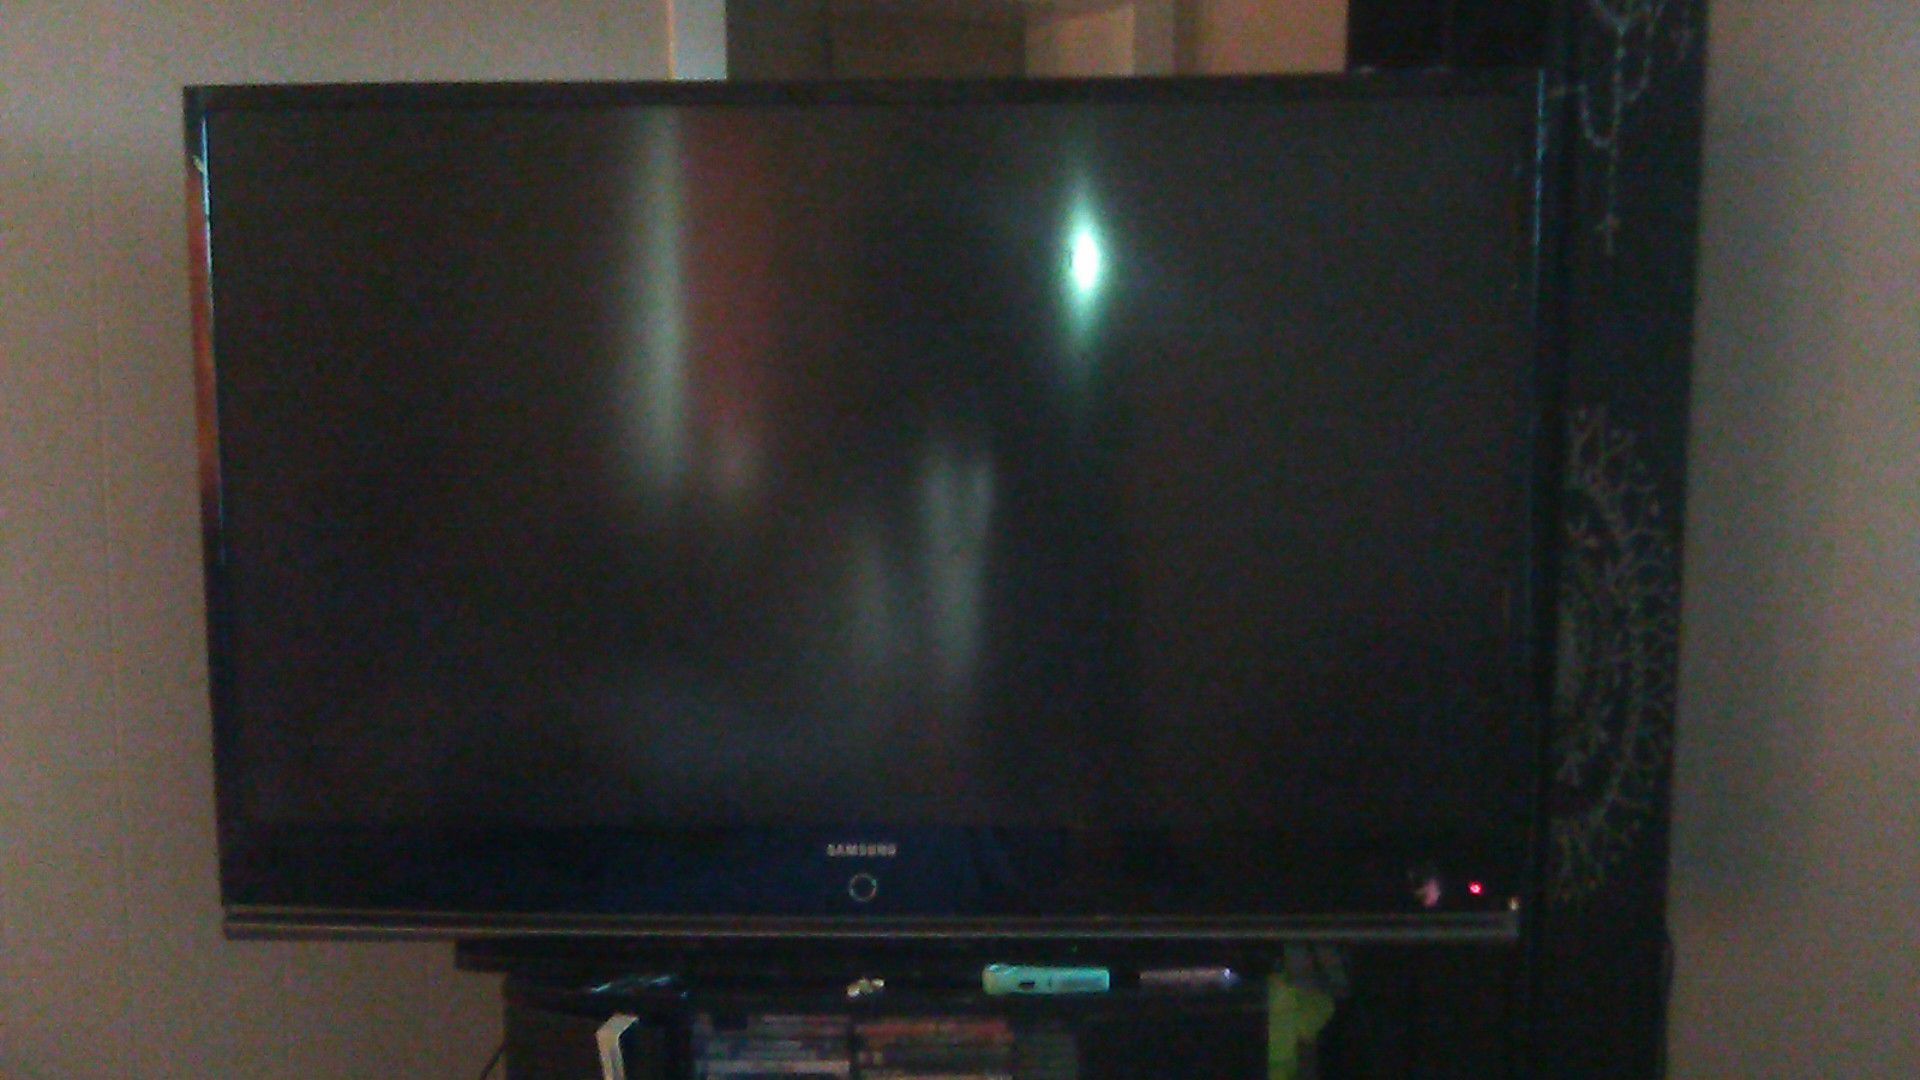 Samsung 60 inch TV. With stand if bought today